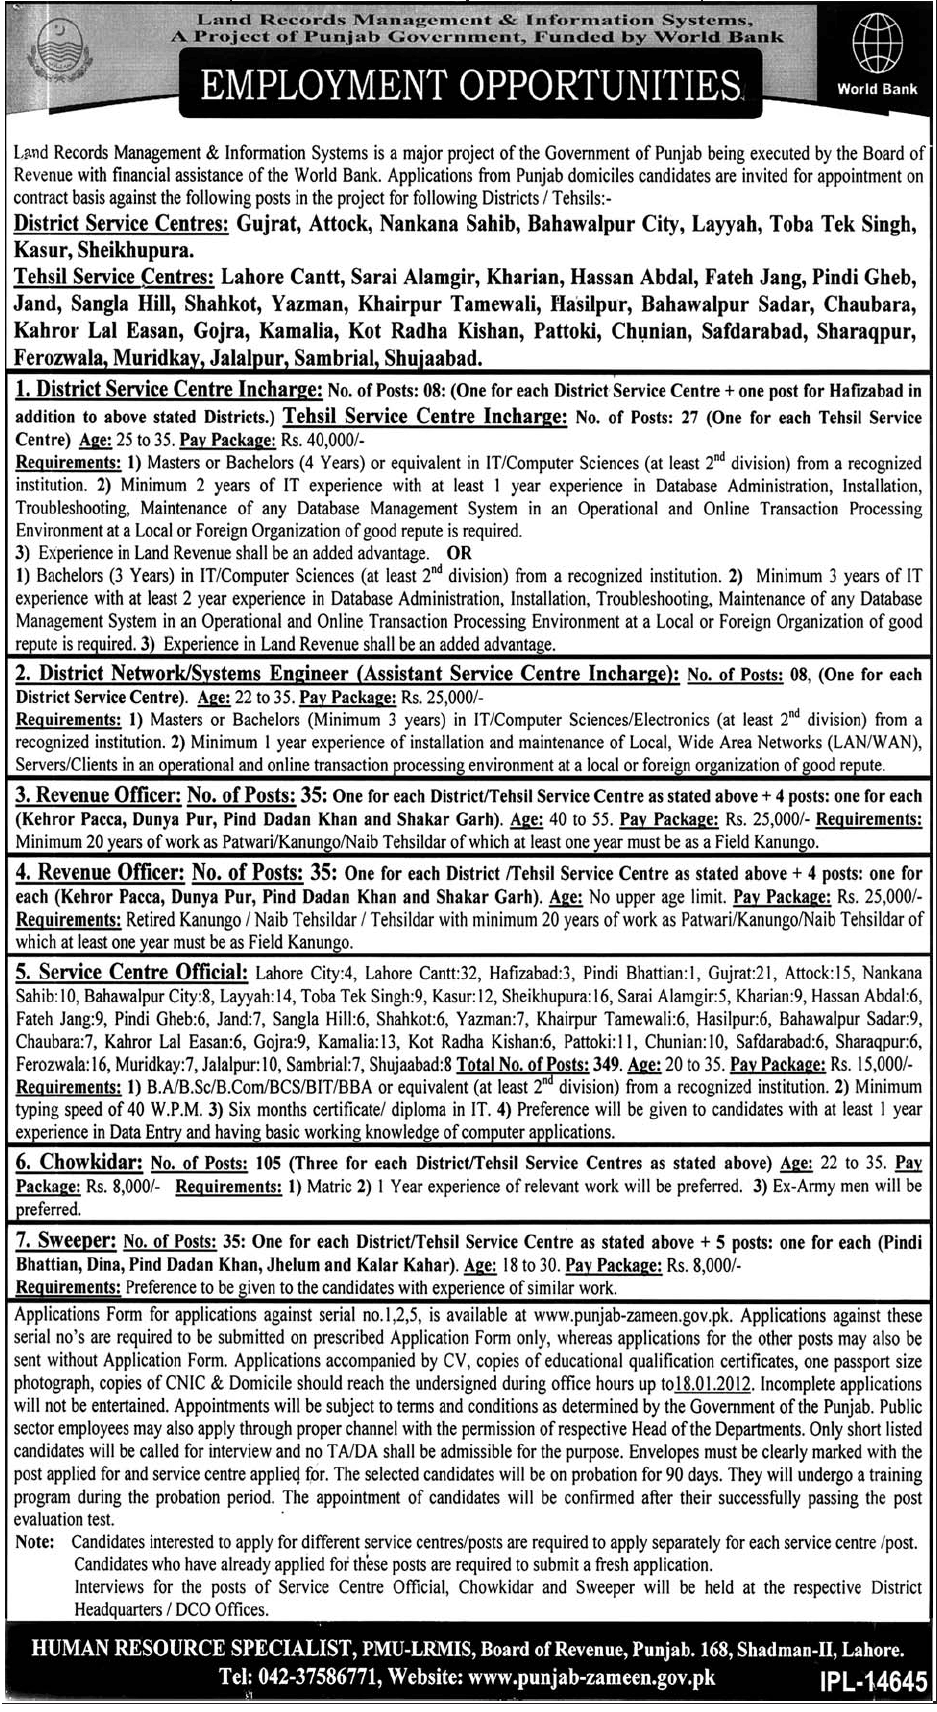 Land Records Management & Information Systems Jobs Opportunities